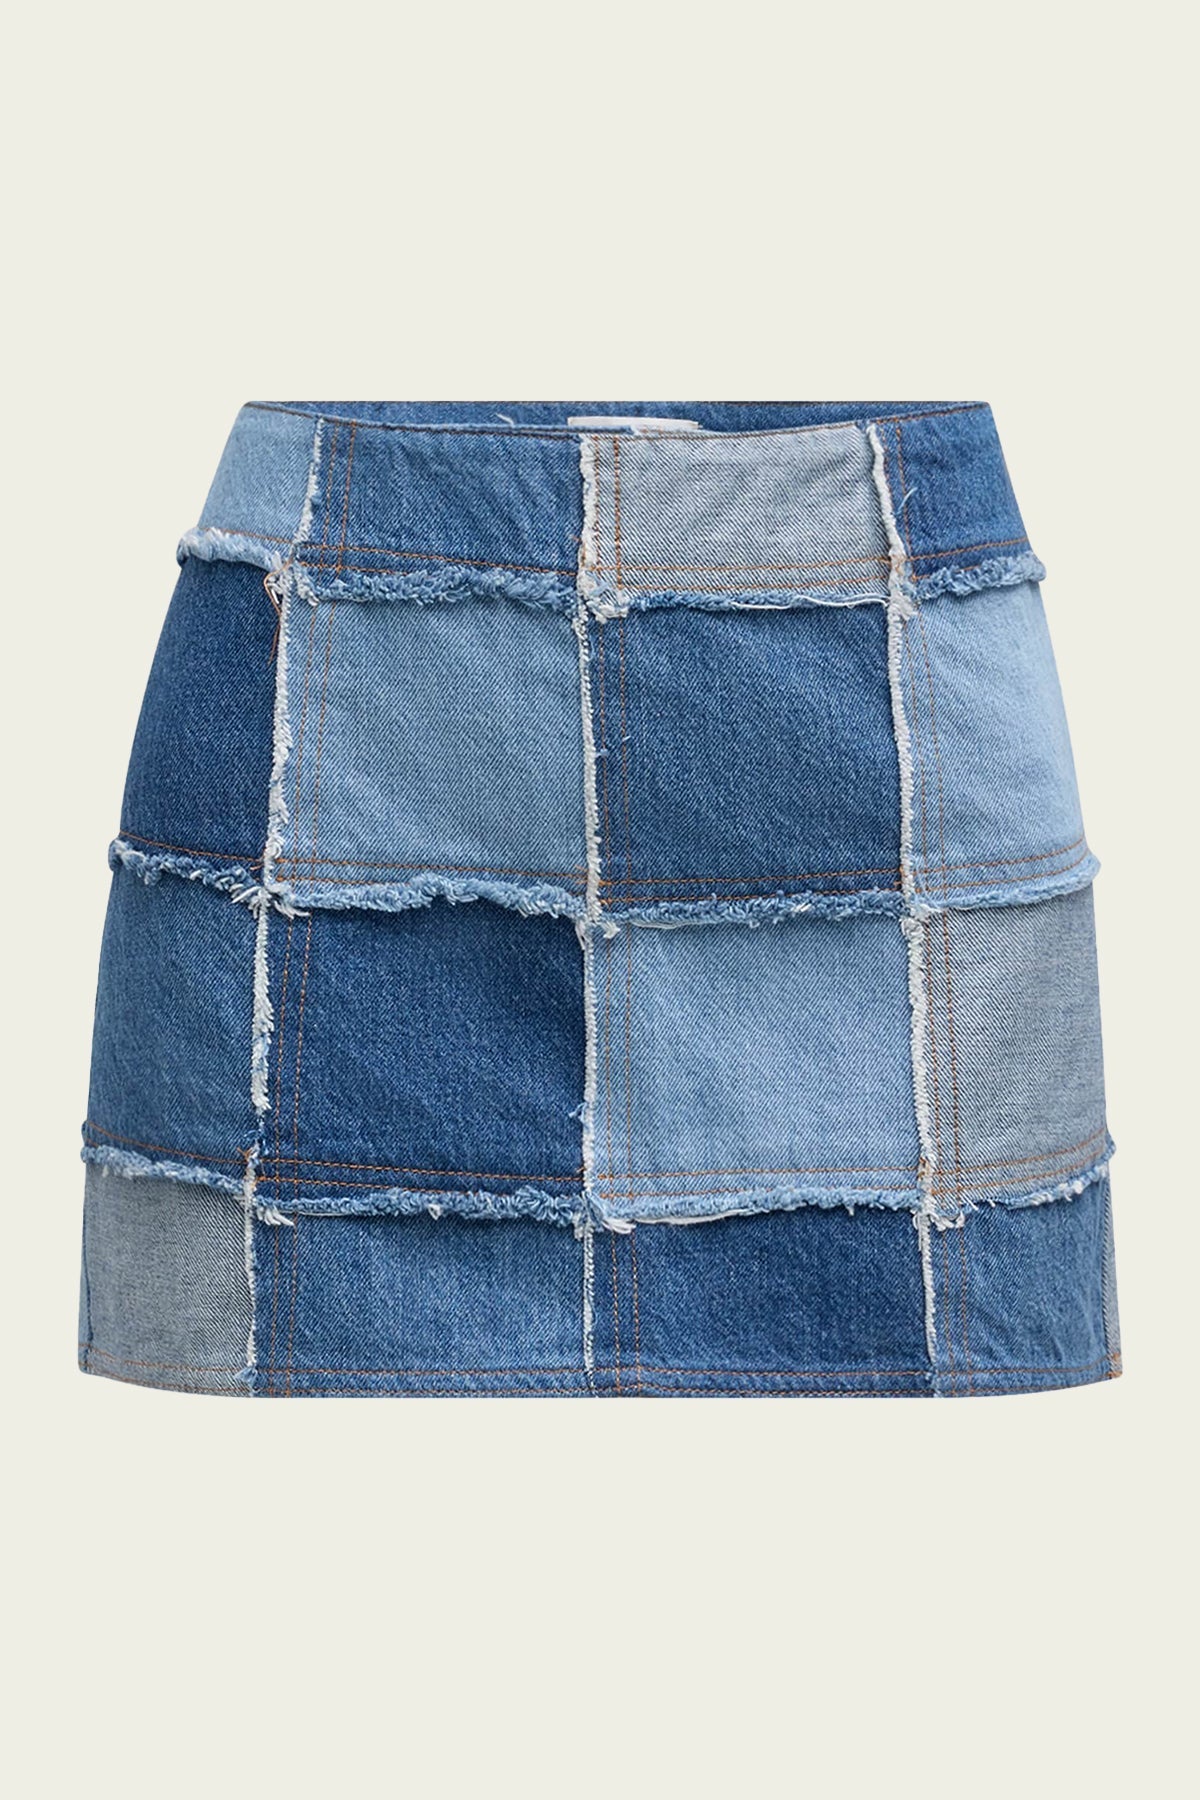 The 70's Patchwork Mini Skirt in Road Trip - shop-olivia.com